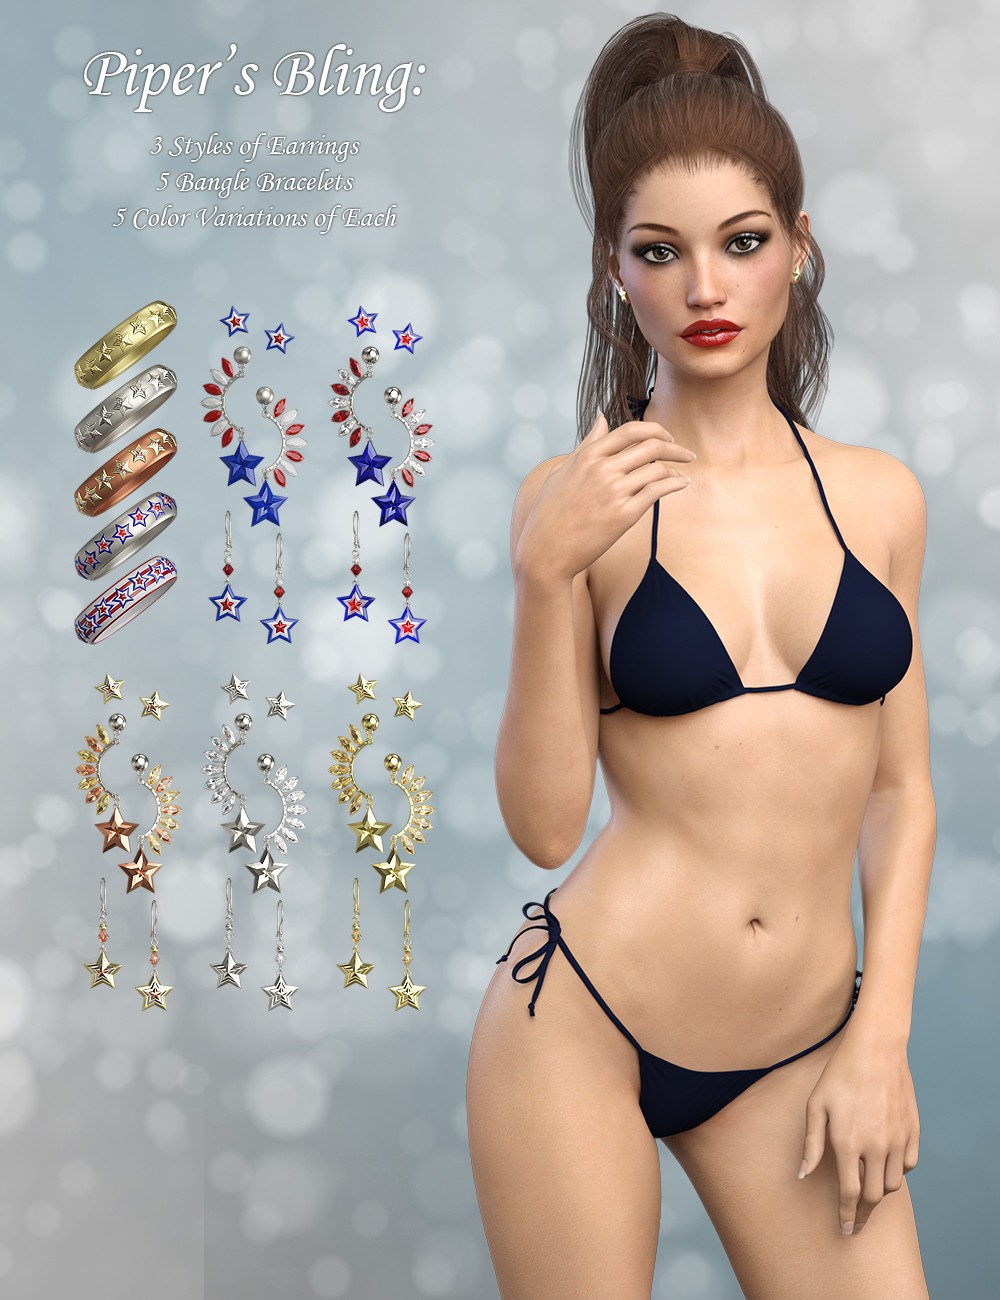 FWSA Piper HD for Victoria 7 and Her Jewelry by: Fred Winkler ArtSabbyFisty & Darc, 3D Models by Daz 3D